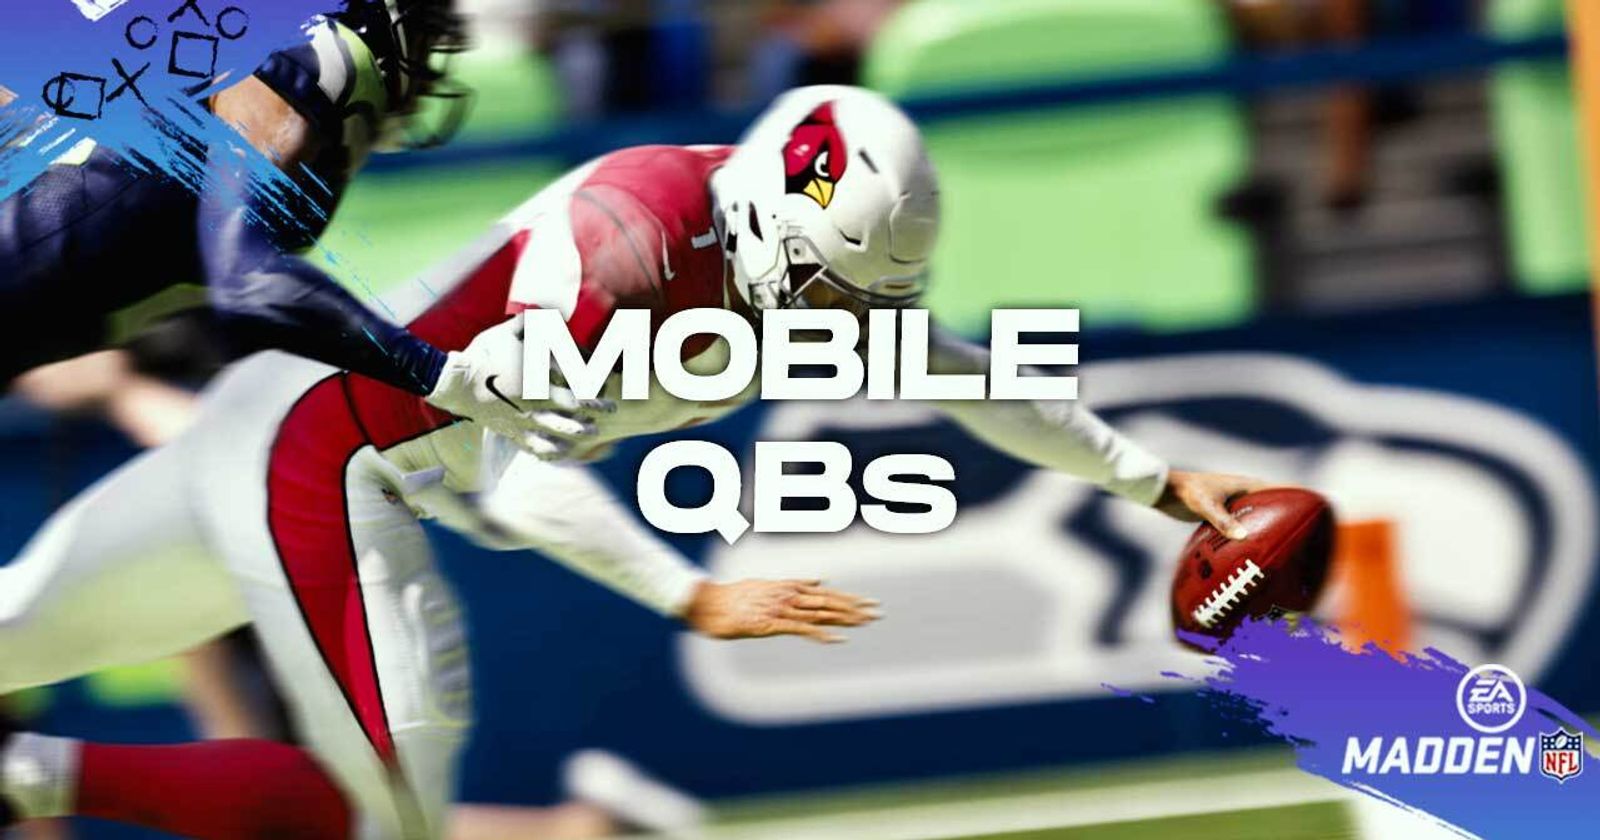 Madden 21: Mobile QBs have changed how the stats for QBs work